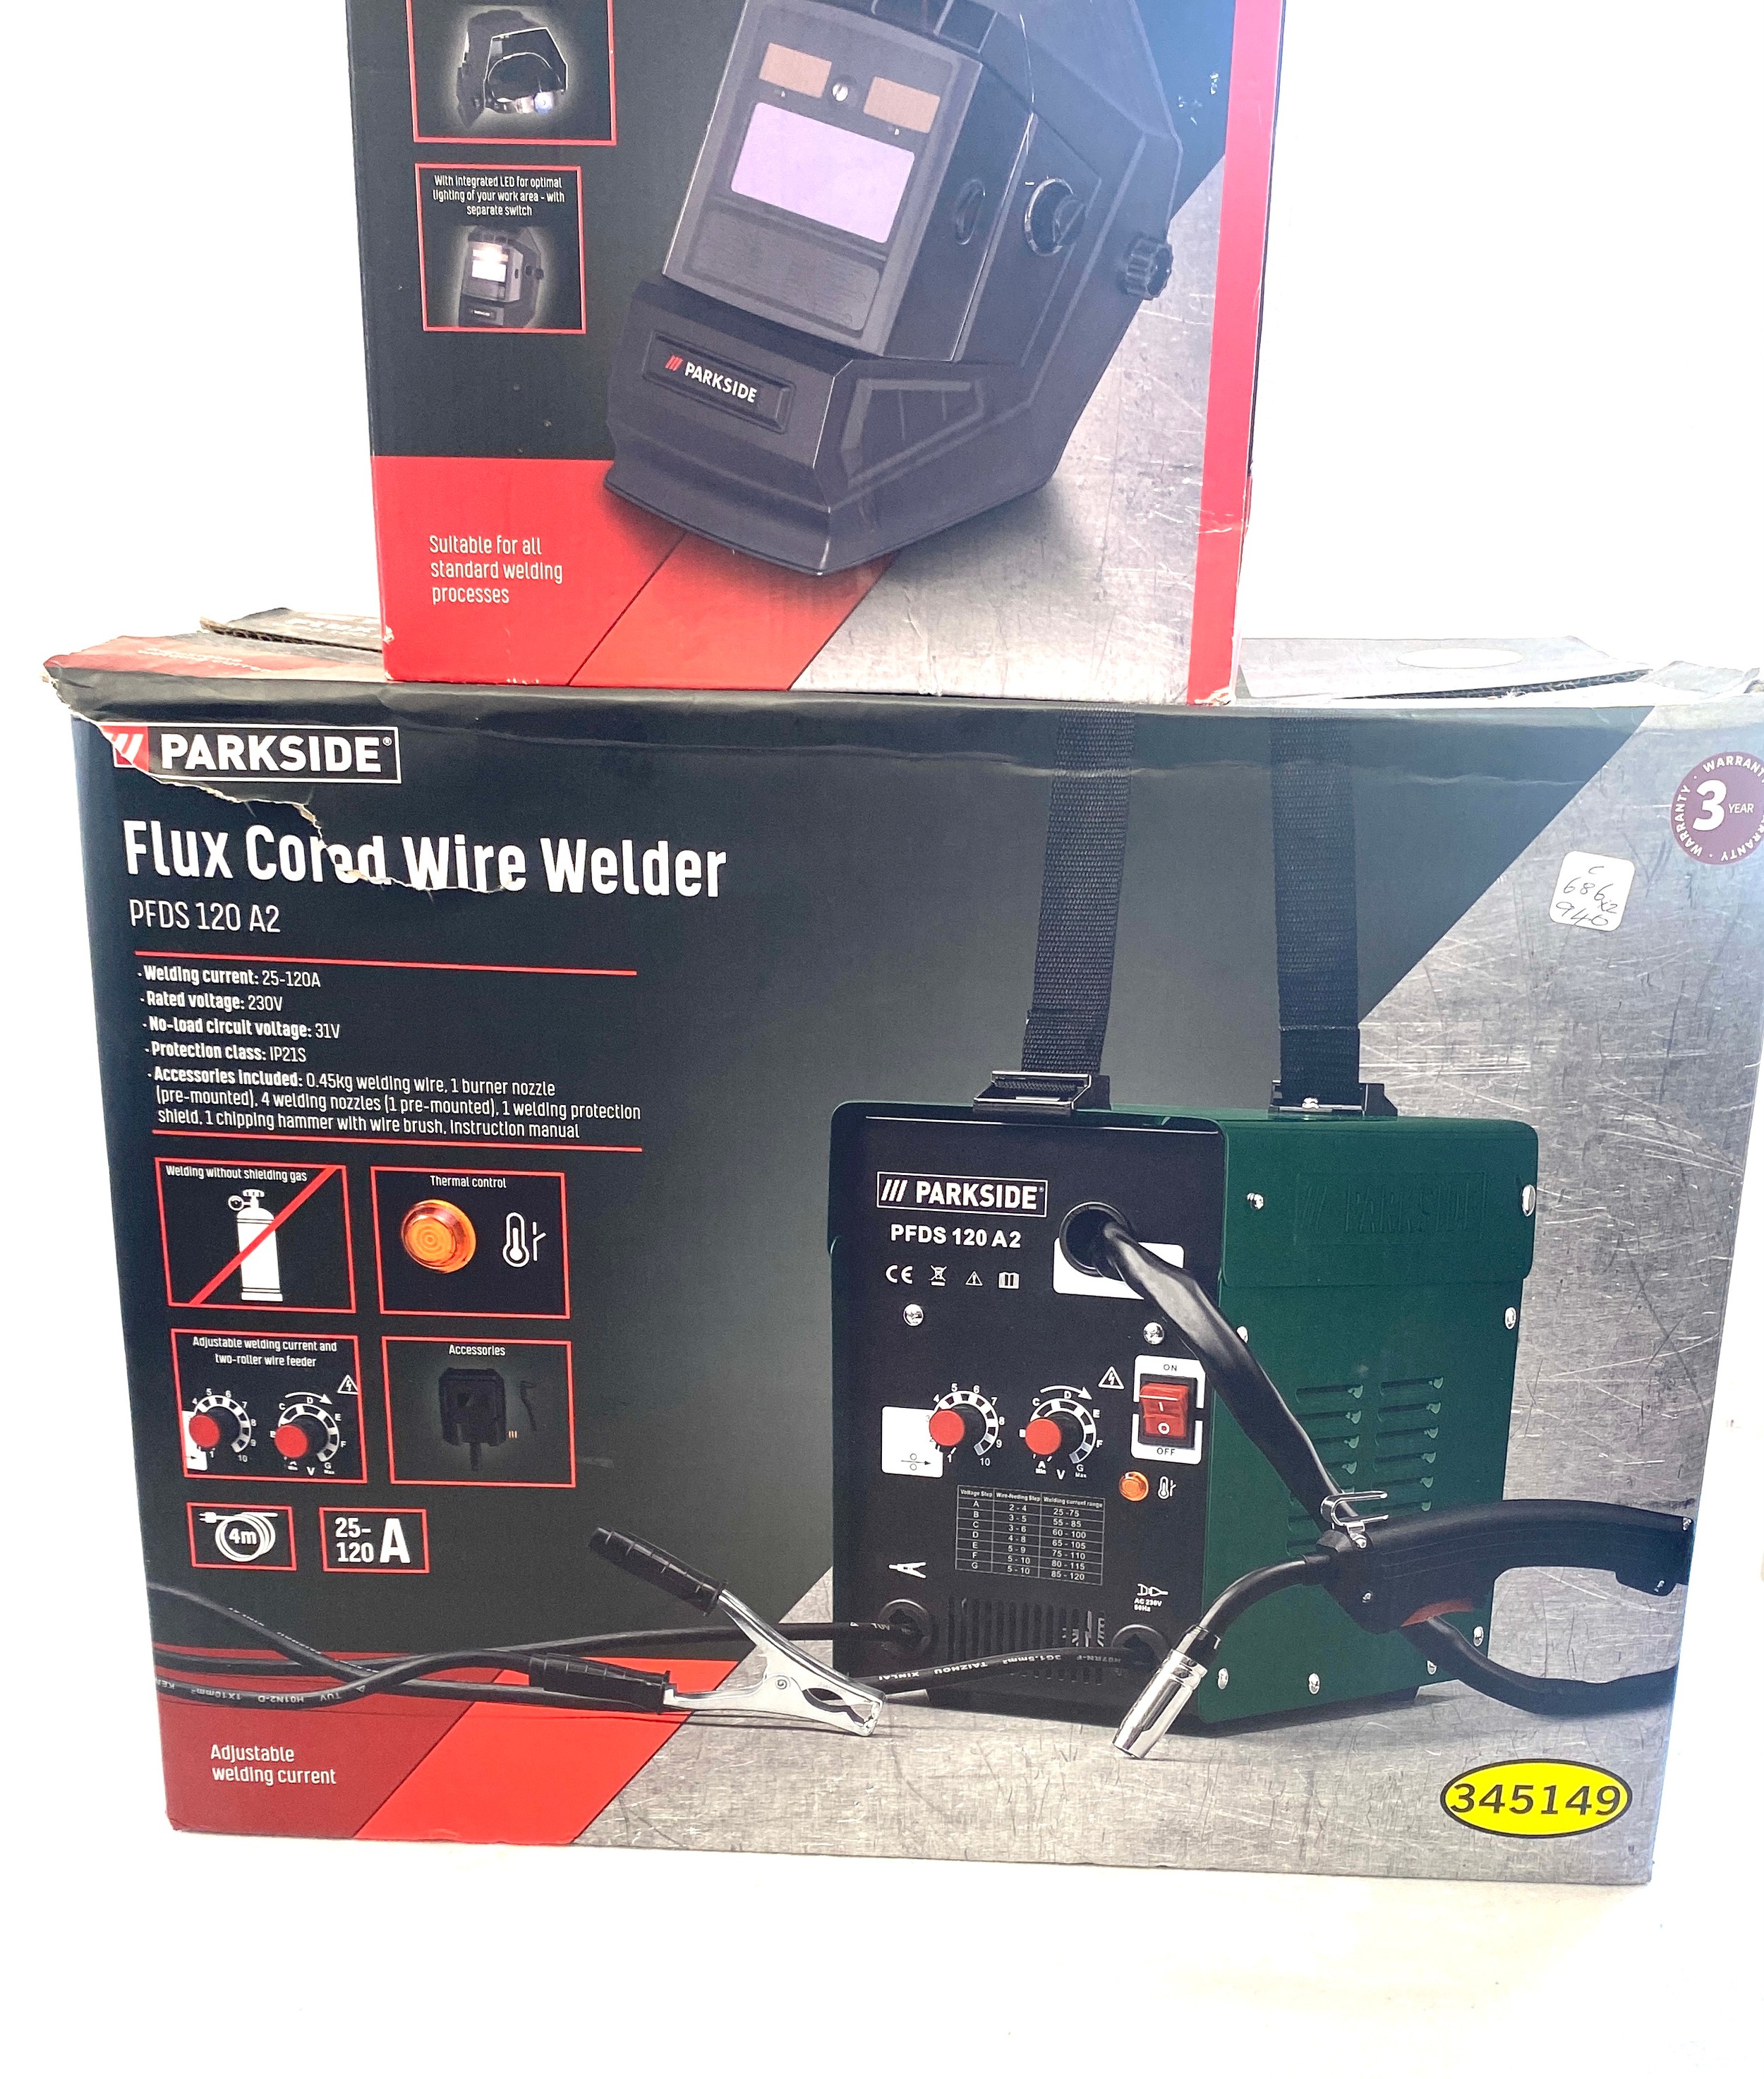 Parkside Flux Cored wired Welder, Parkside automatic welding helmet, both new in boxes - Image 2 of 3